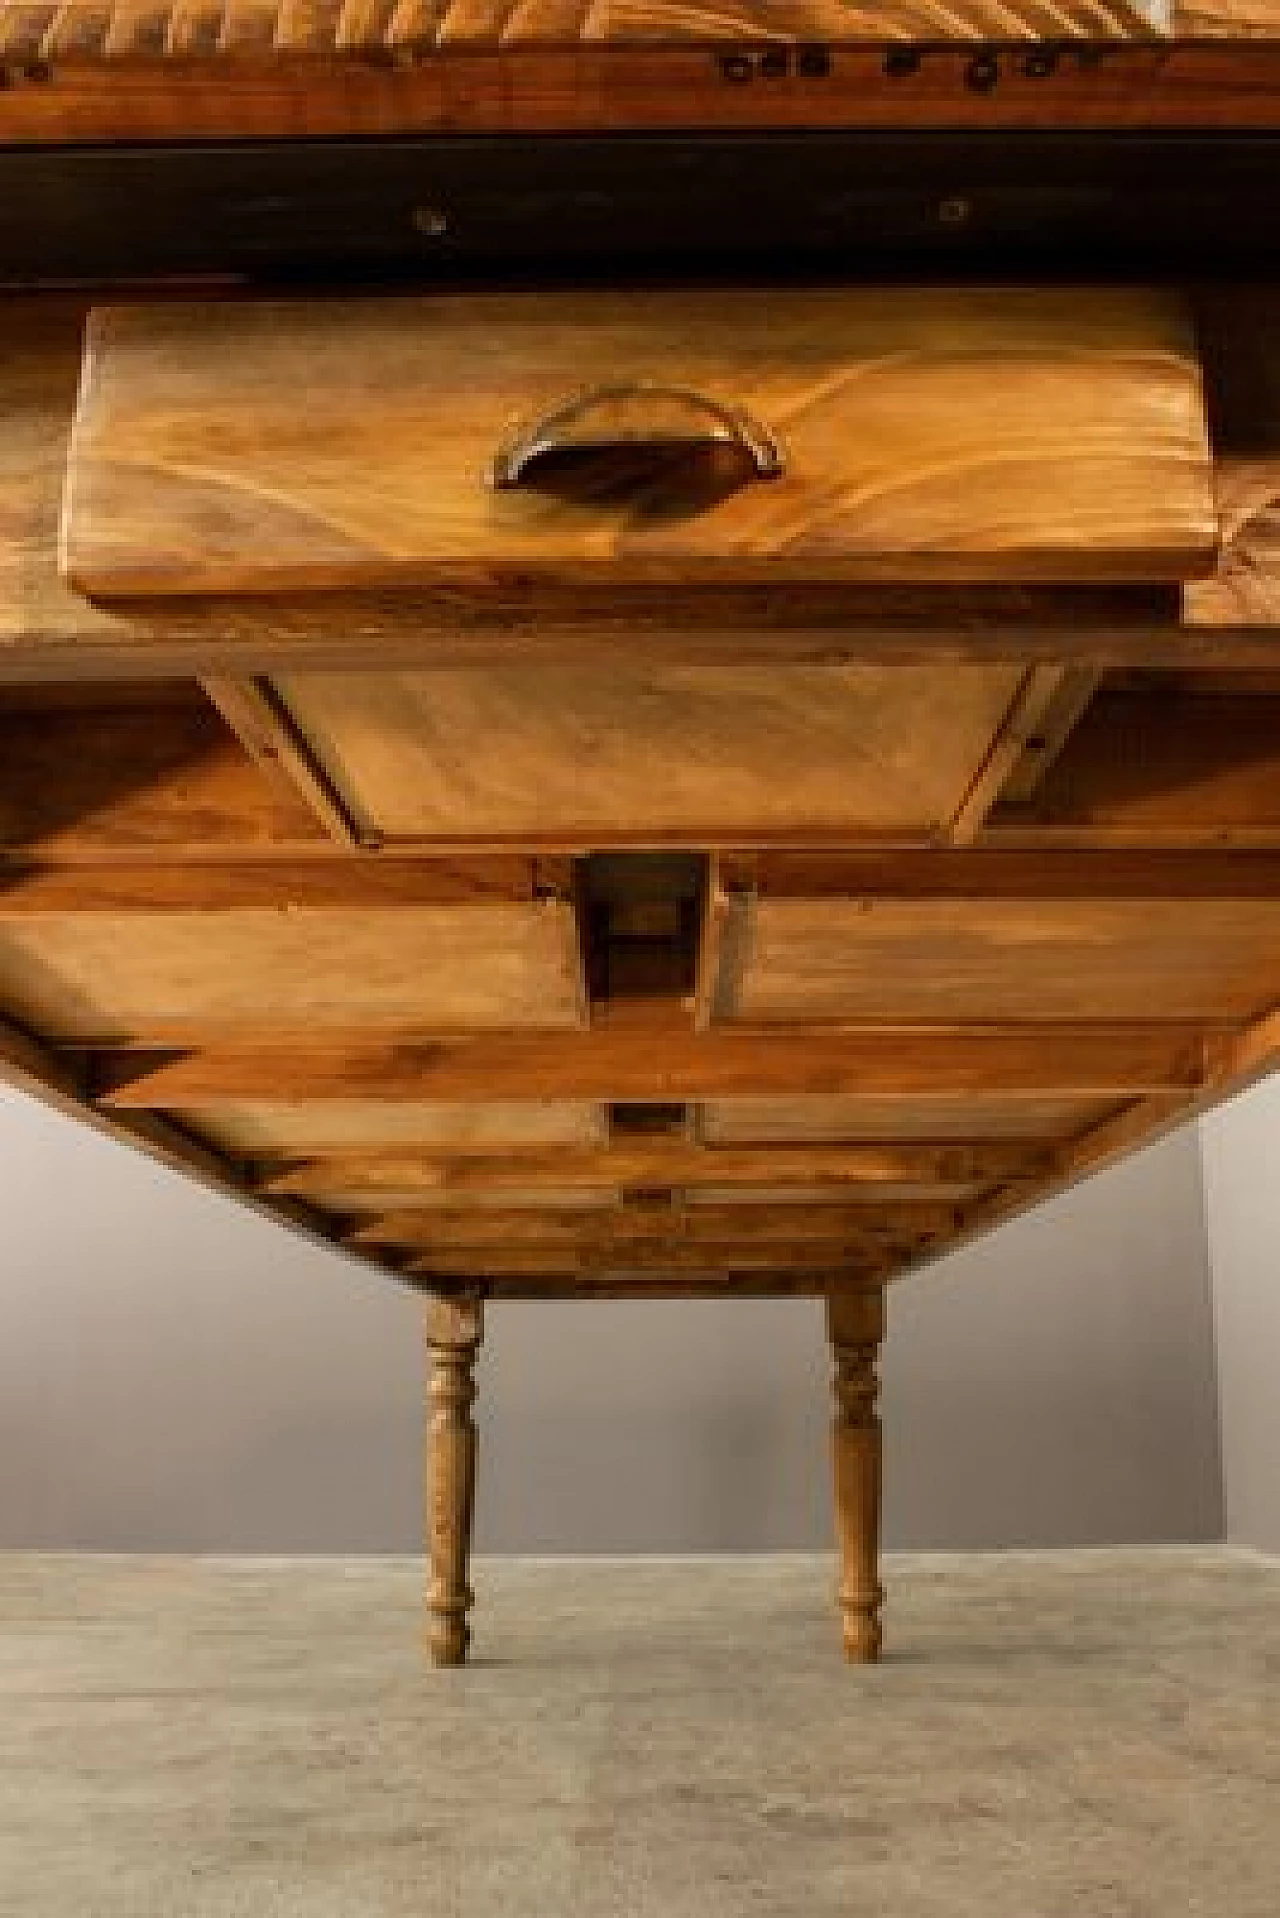 Handcrafted cedar table with 12 drawers, '2000 7